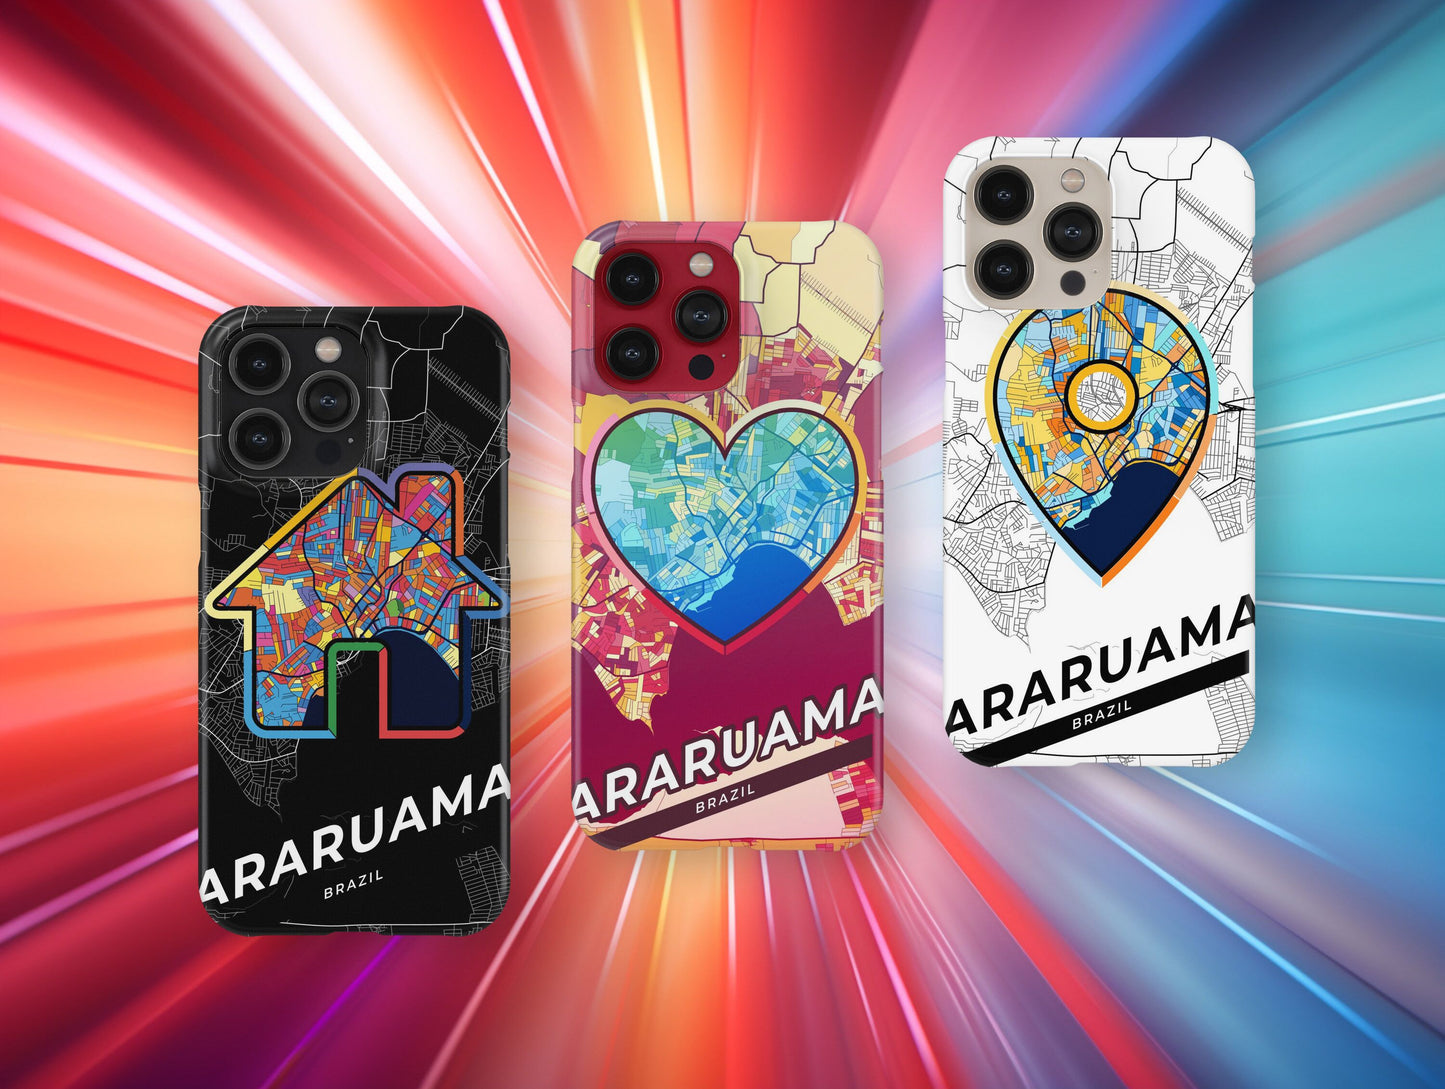 Araruama Brazil slim phone case with colorful icon. Birthday, wedding or housewarming gift. Couple match cases.